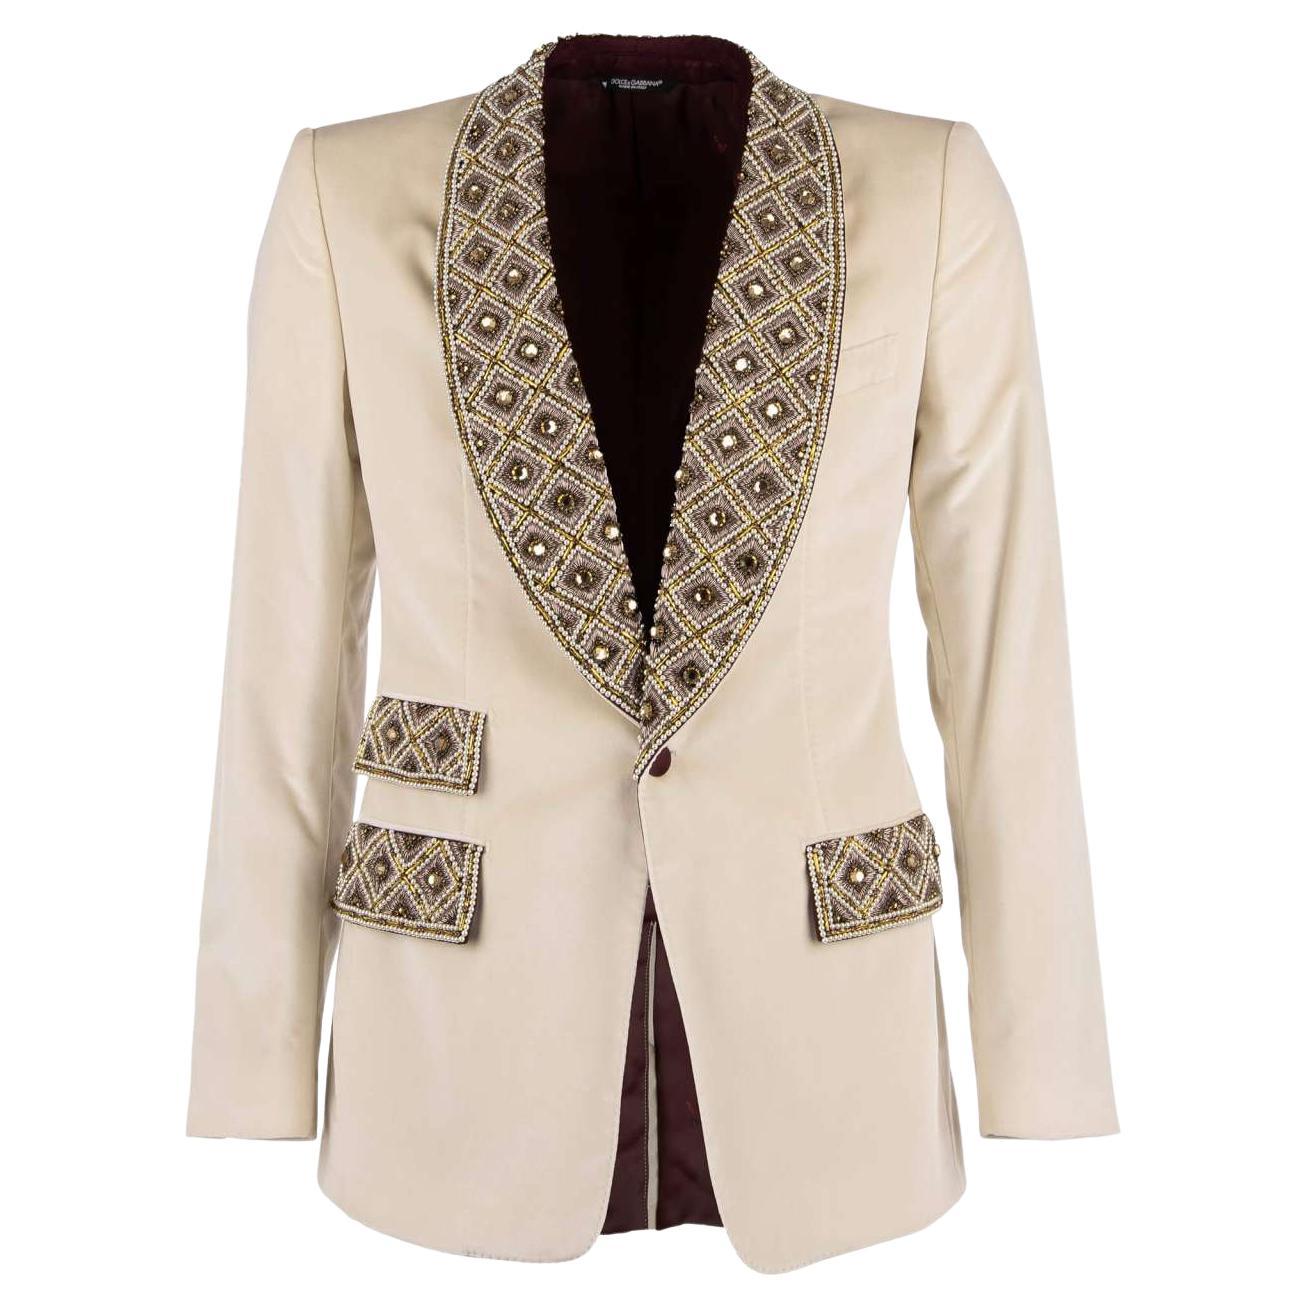 D&G Velvet Tuxedo Blazer with Crystals, Pearls and Gold Embroidery White 56 For Sale